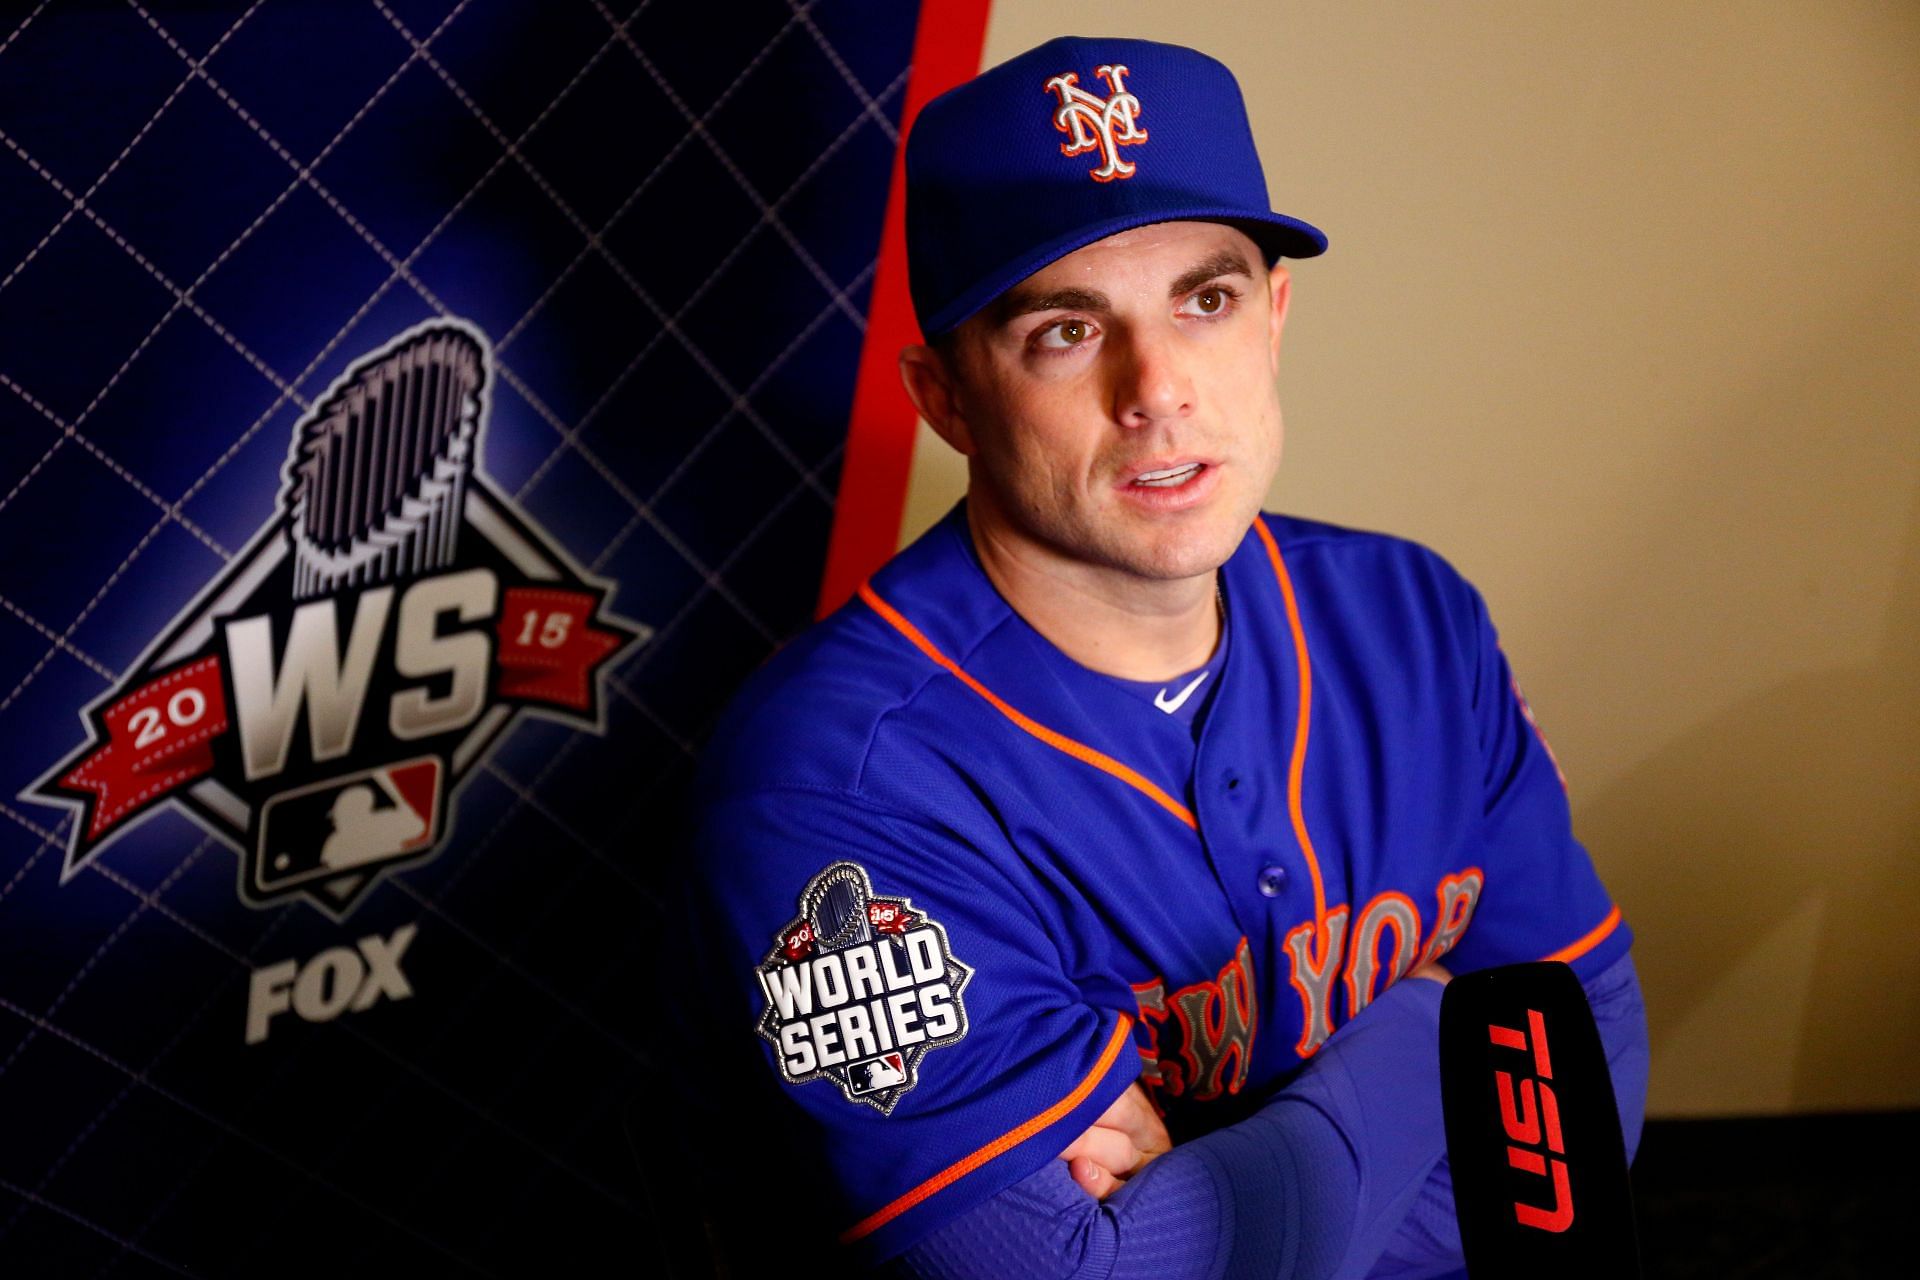 David Wright's 'best day ever' finally arrives as Mets reach World